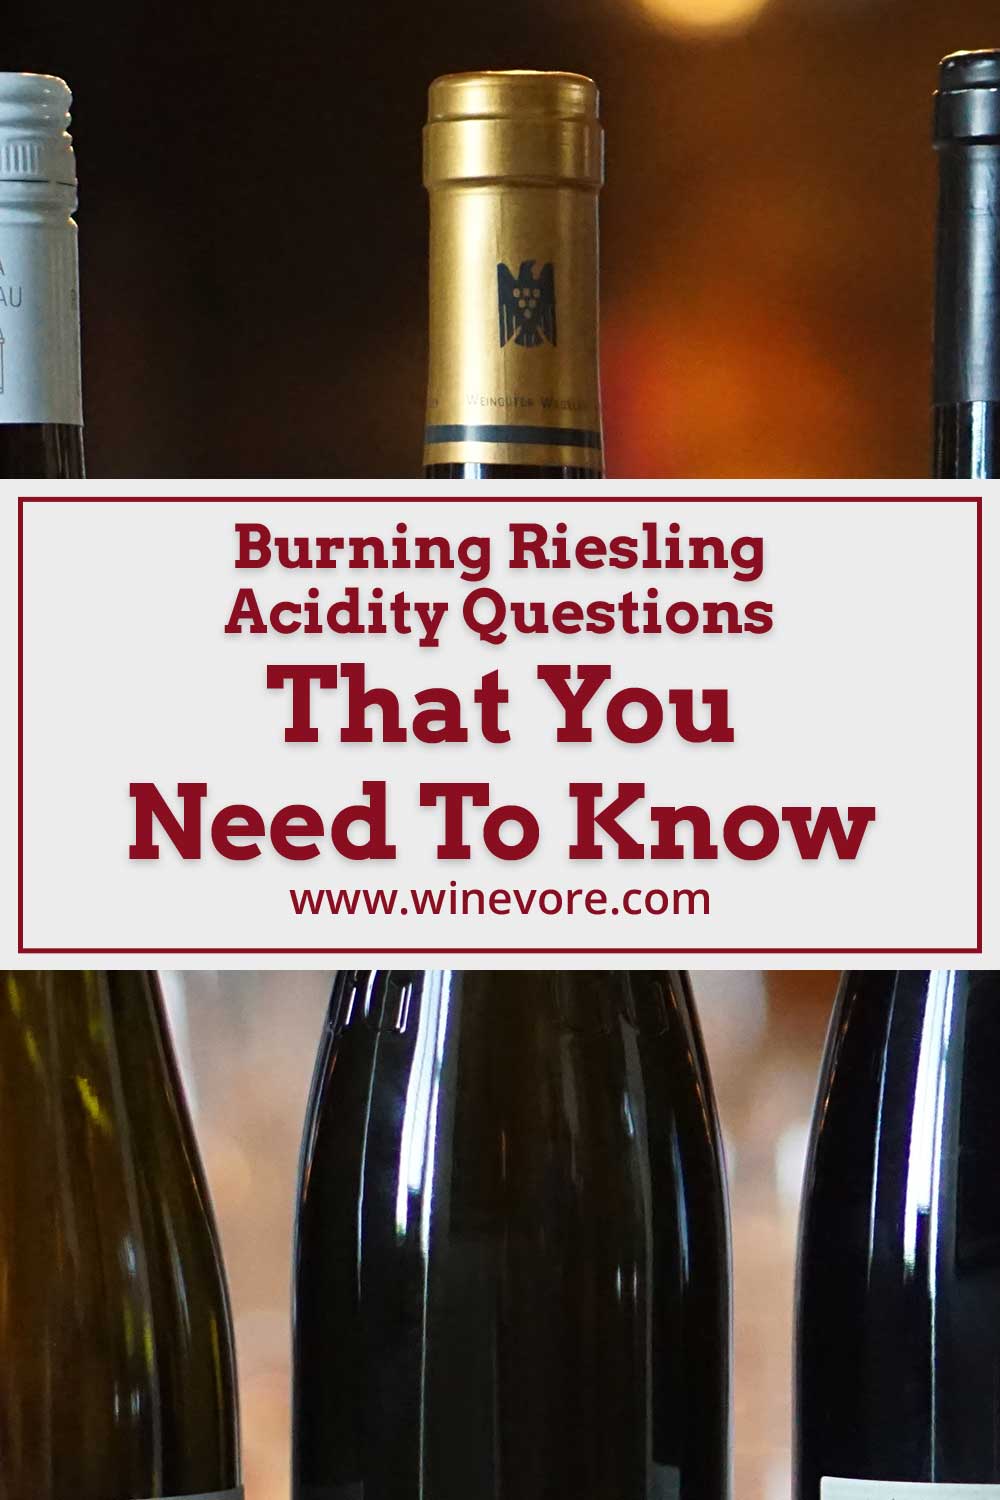 Three sealed wine bottles - Riesling Acidity Questions.